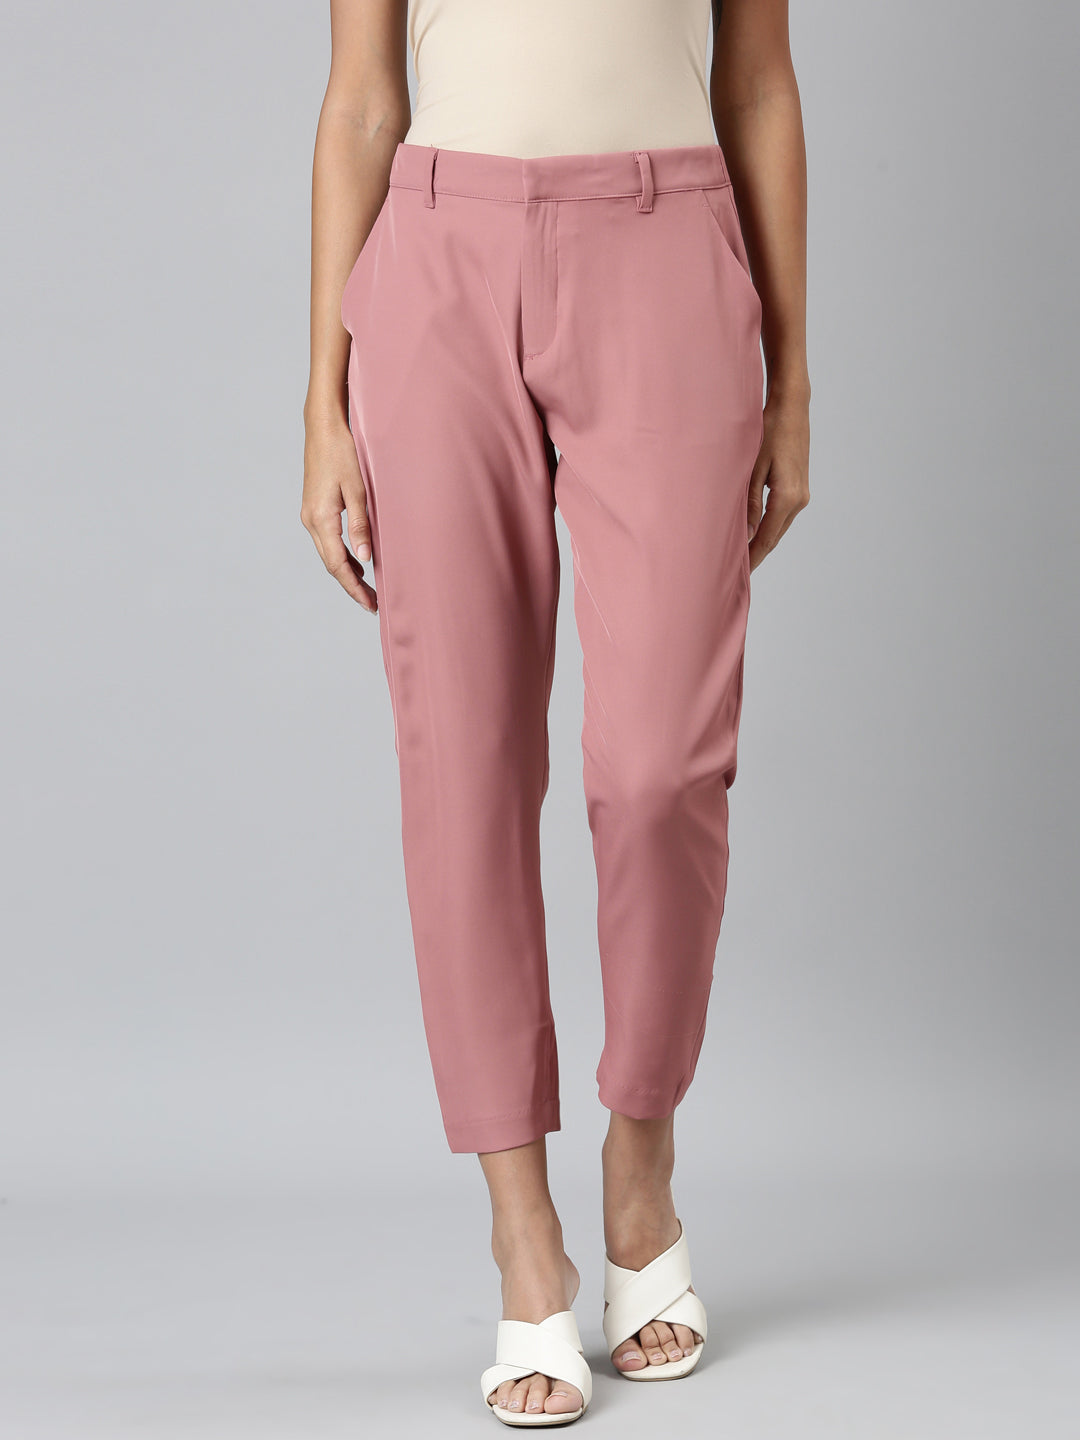 Relaxed Straight Ankle Jeans In Petite With High Rise And Square Pockets -  Turning Pink Pink | NYDJ